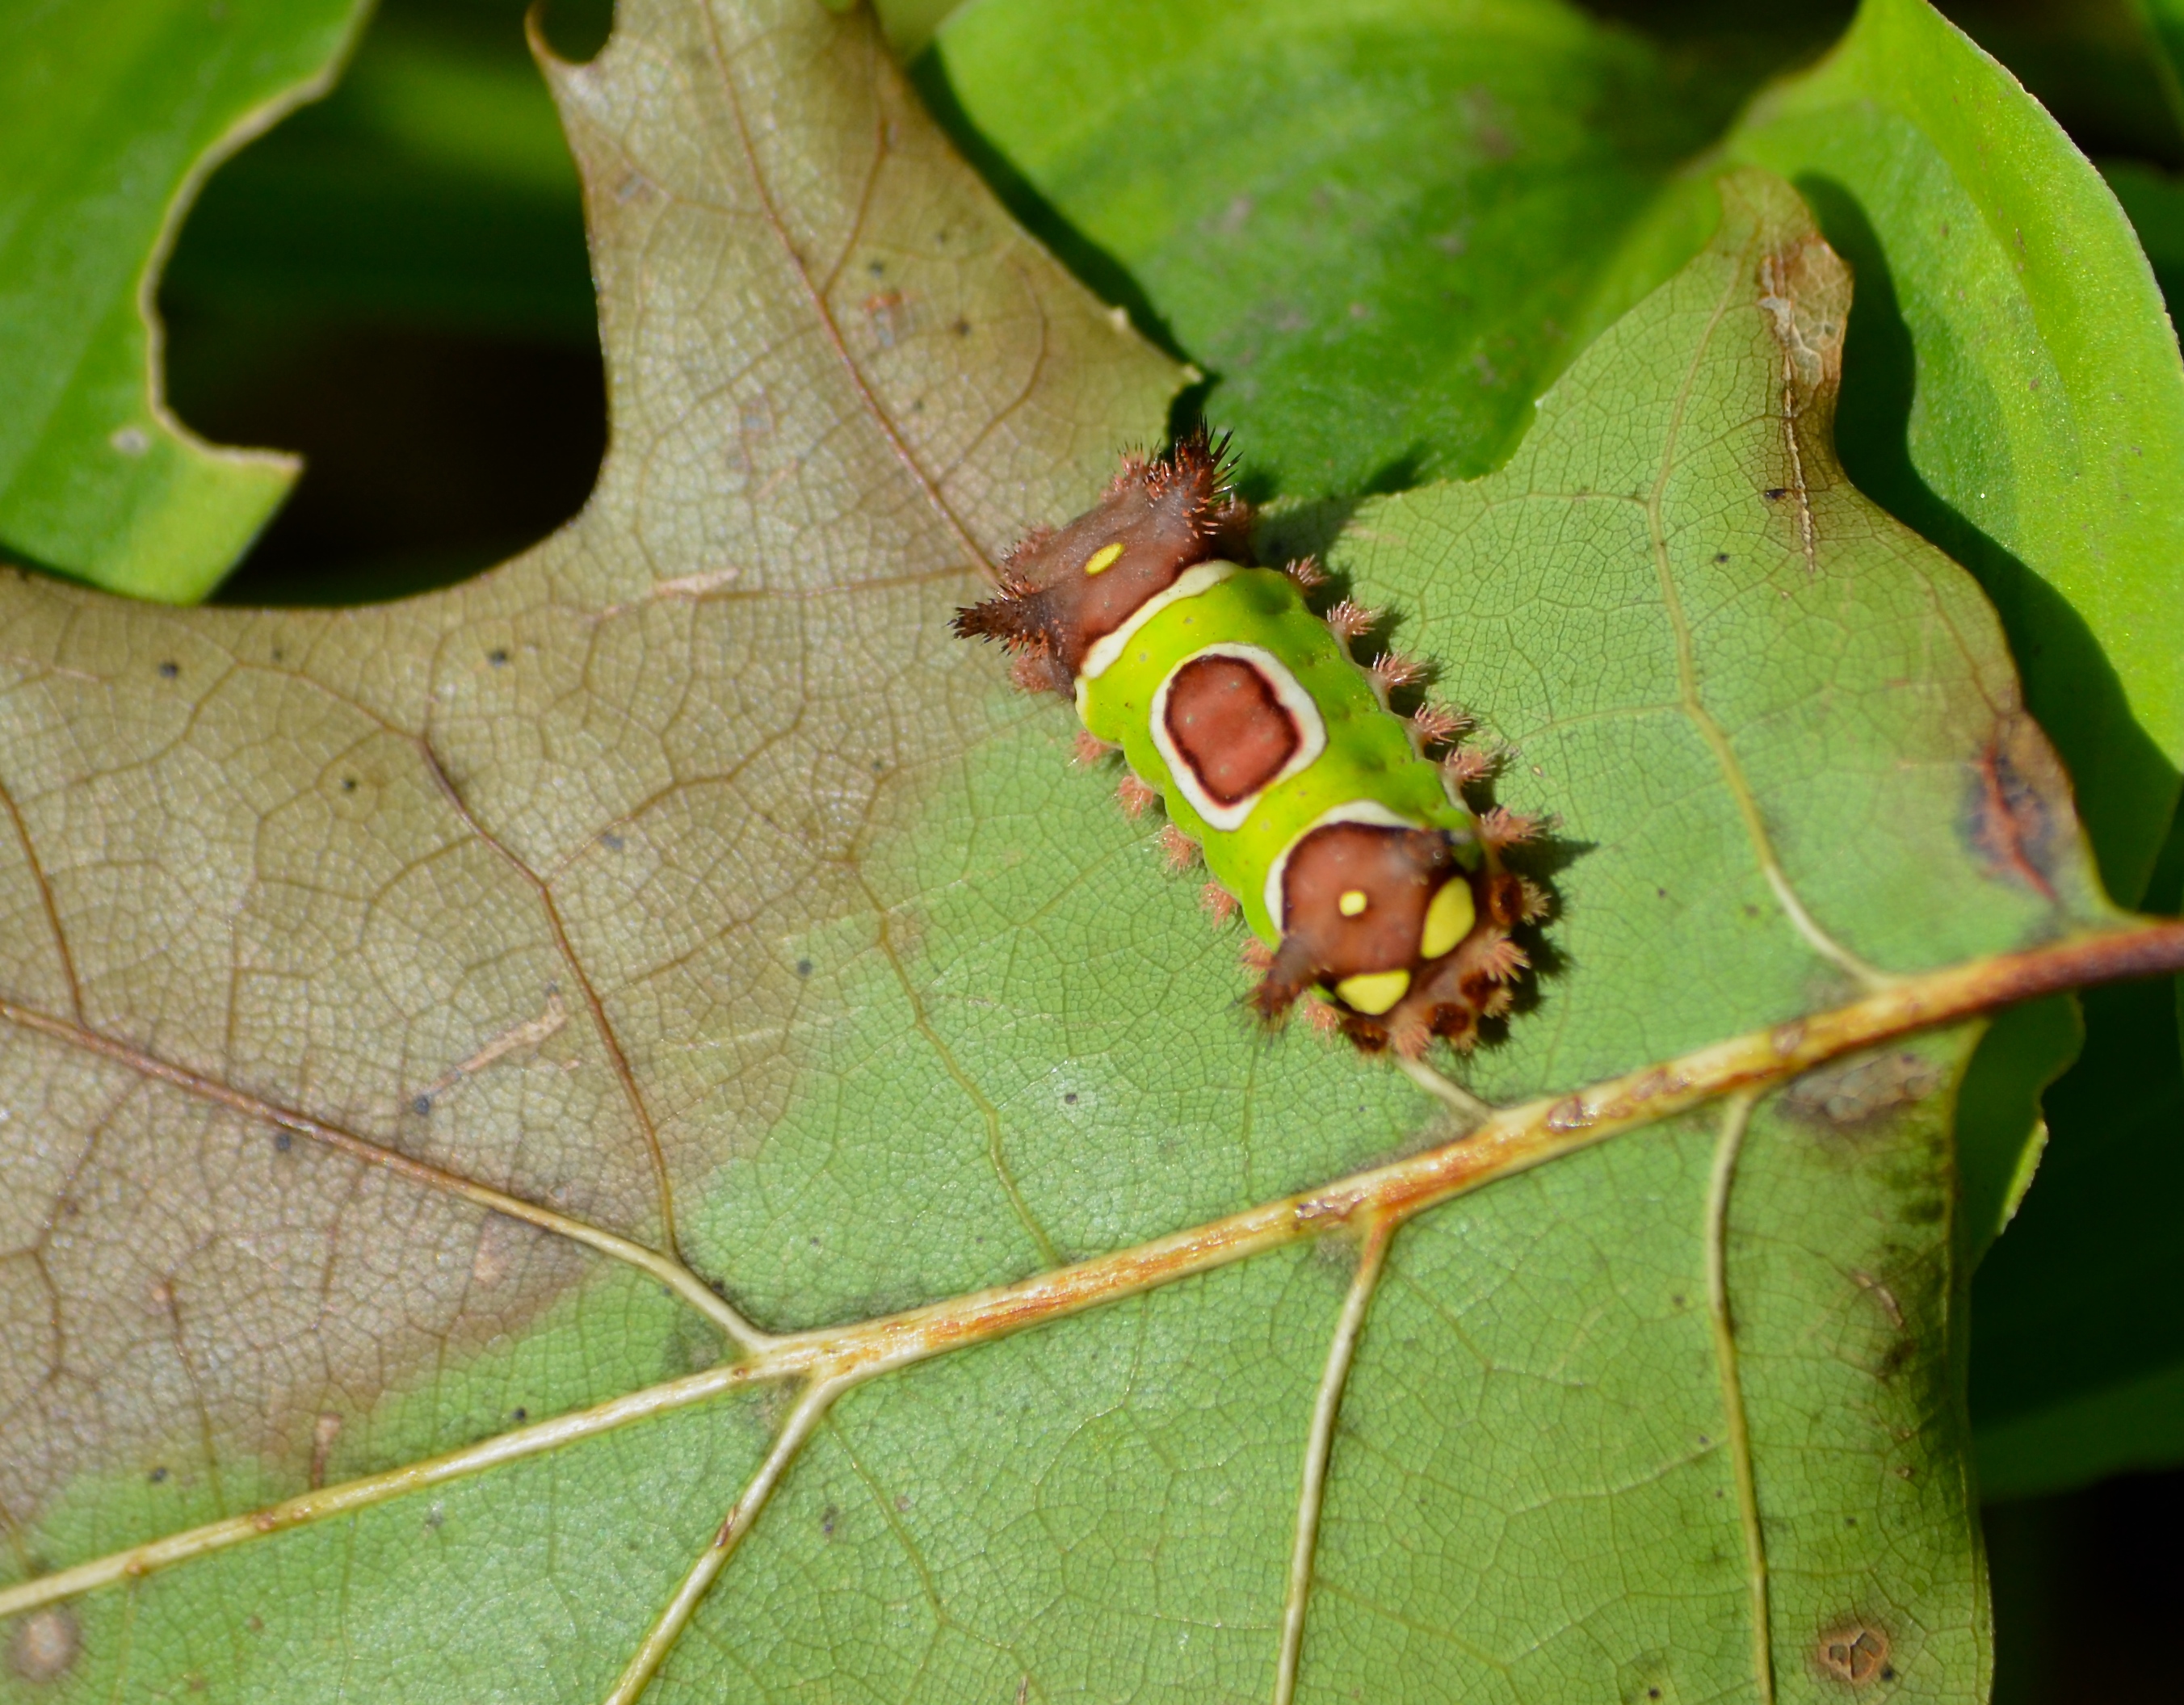 The saddleback caterpillar is obviously named, the slug part of its name refers to the foot underneath that looks like a slug foot. The foot allows that caterpillar to cling to leaves and carry on feeding.